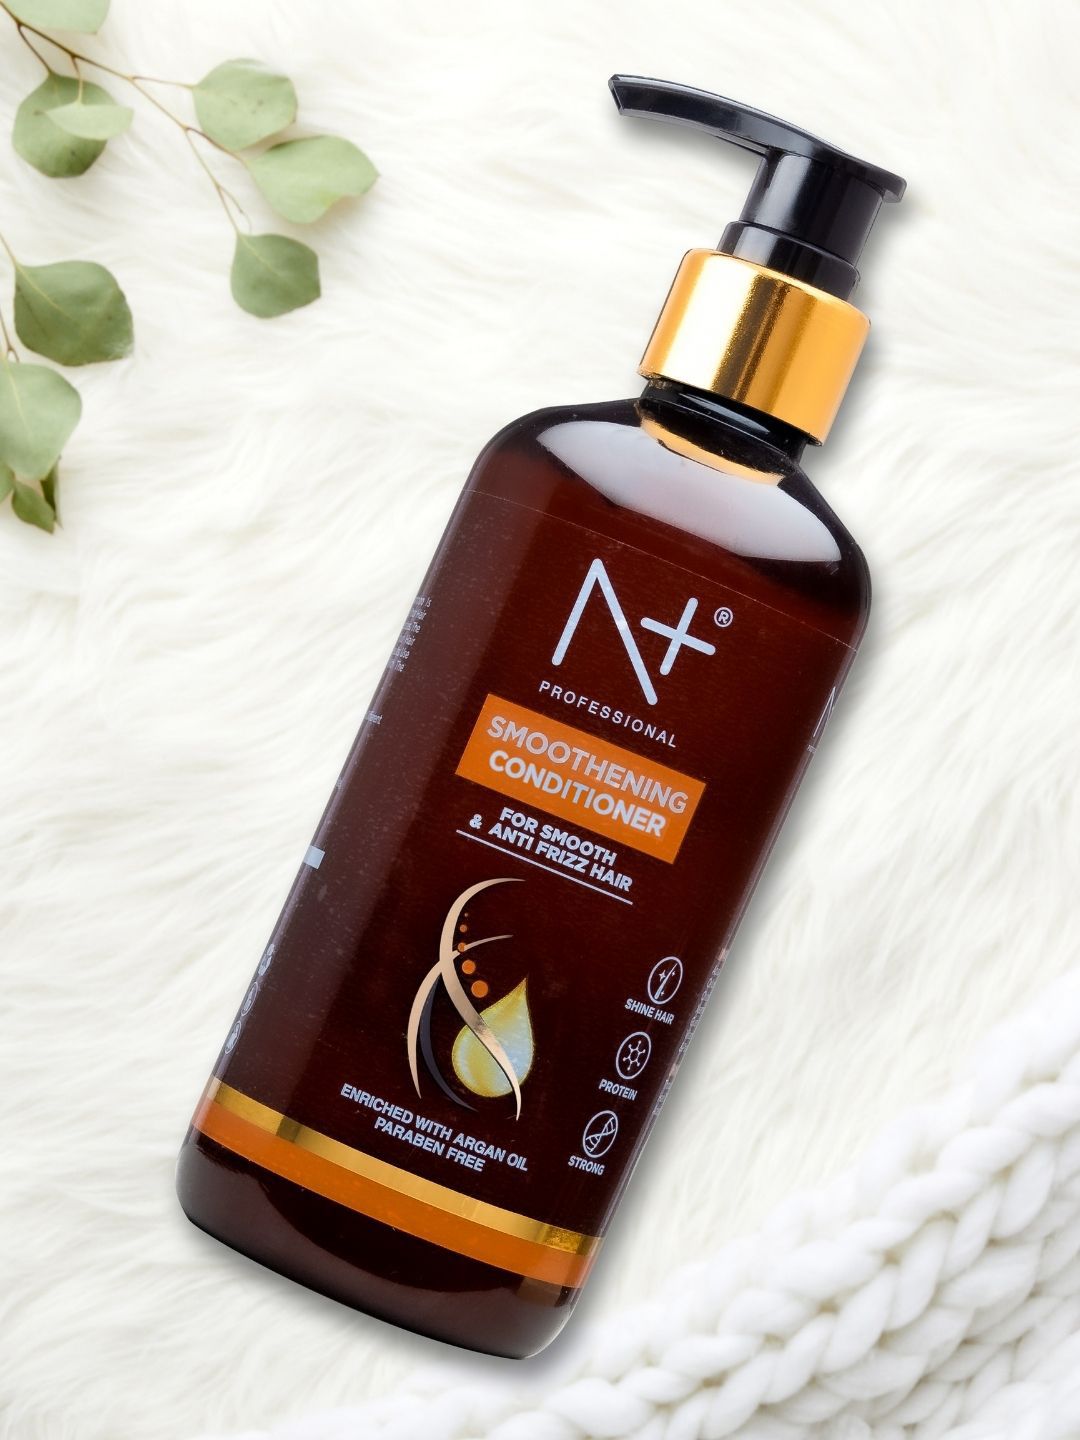 N Plus Professional Smoothening Conditioner with Argan Oil for Anti-Frizz Hair - 300ml Price in India